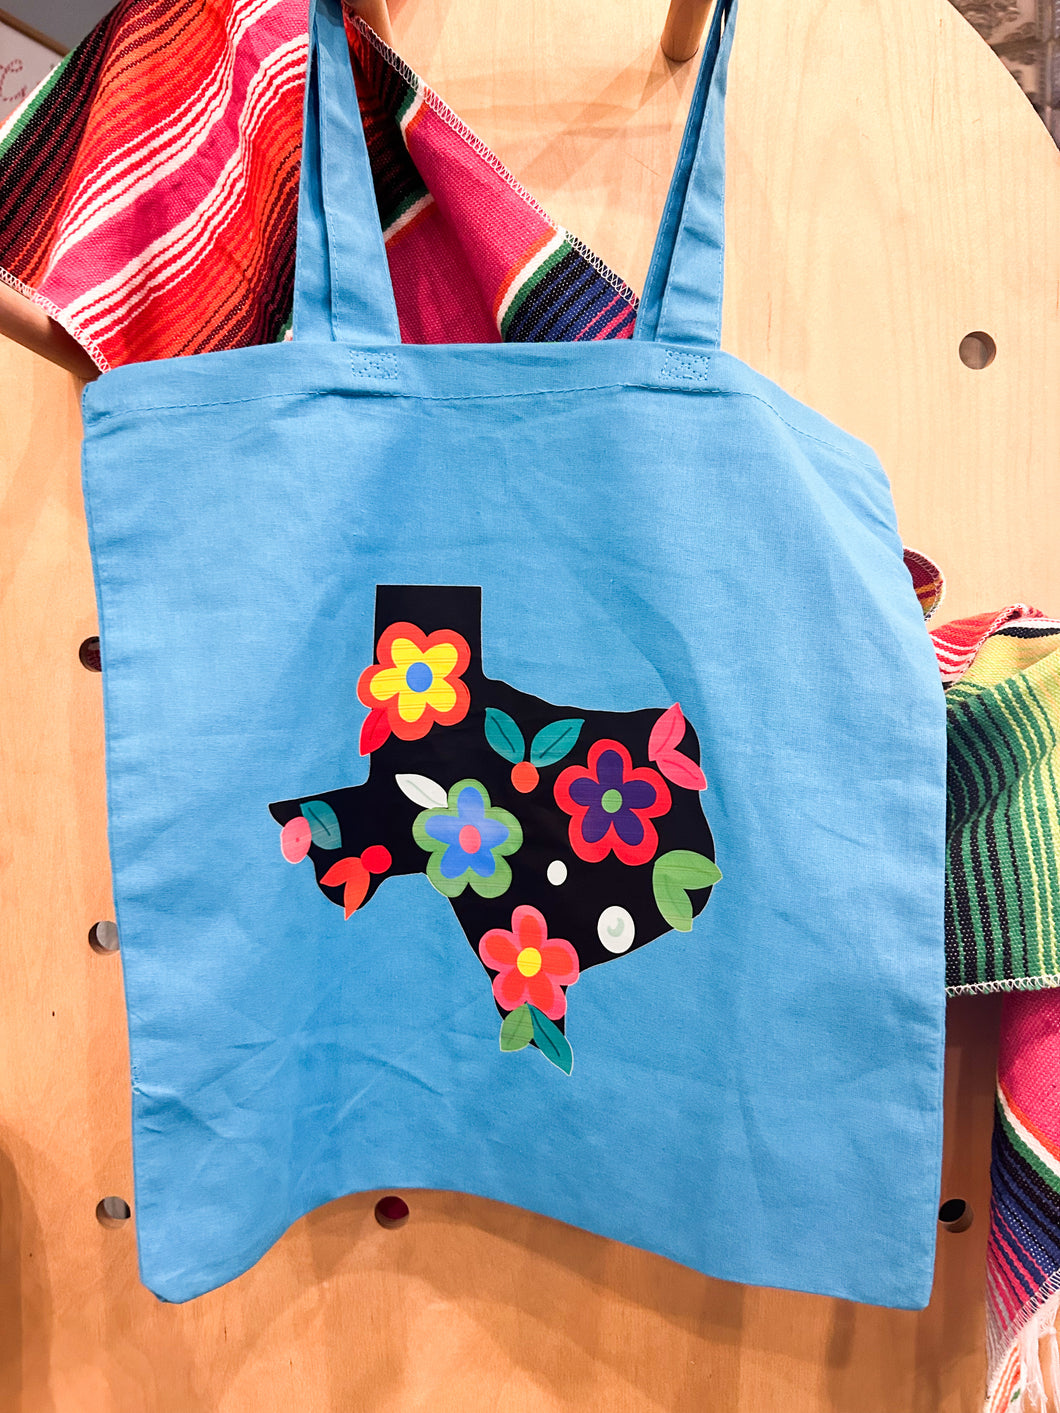 Texas Embroidered Tote Bag